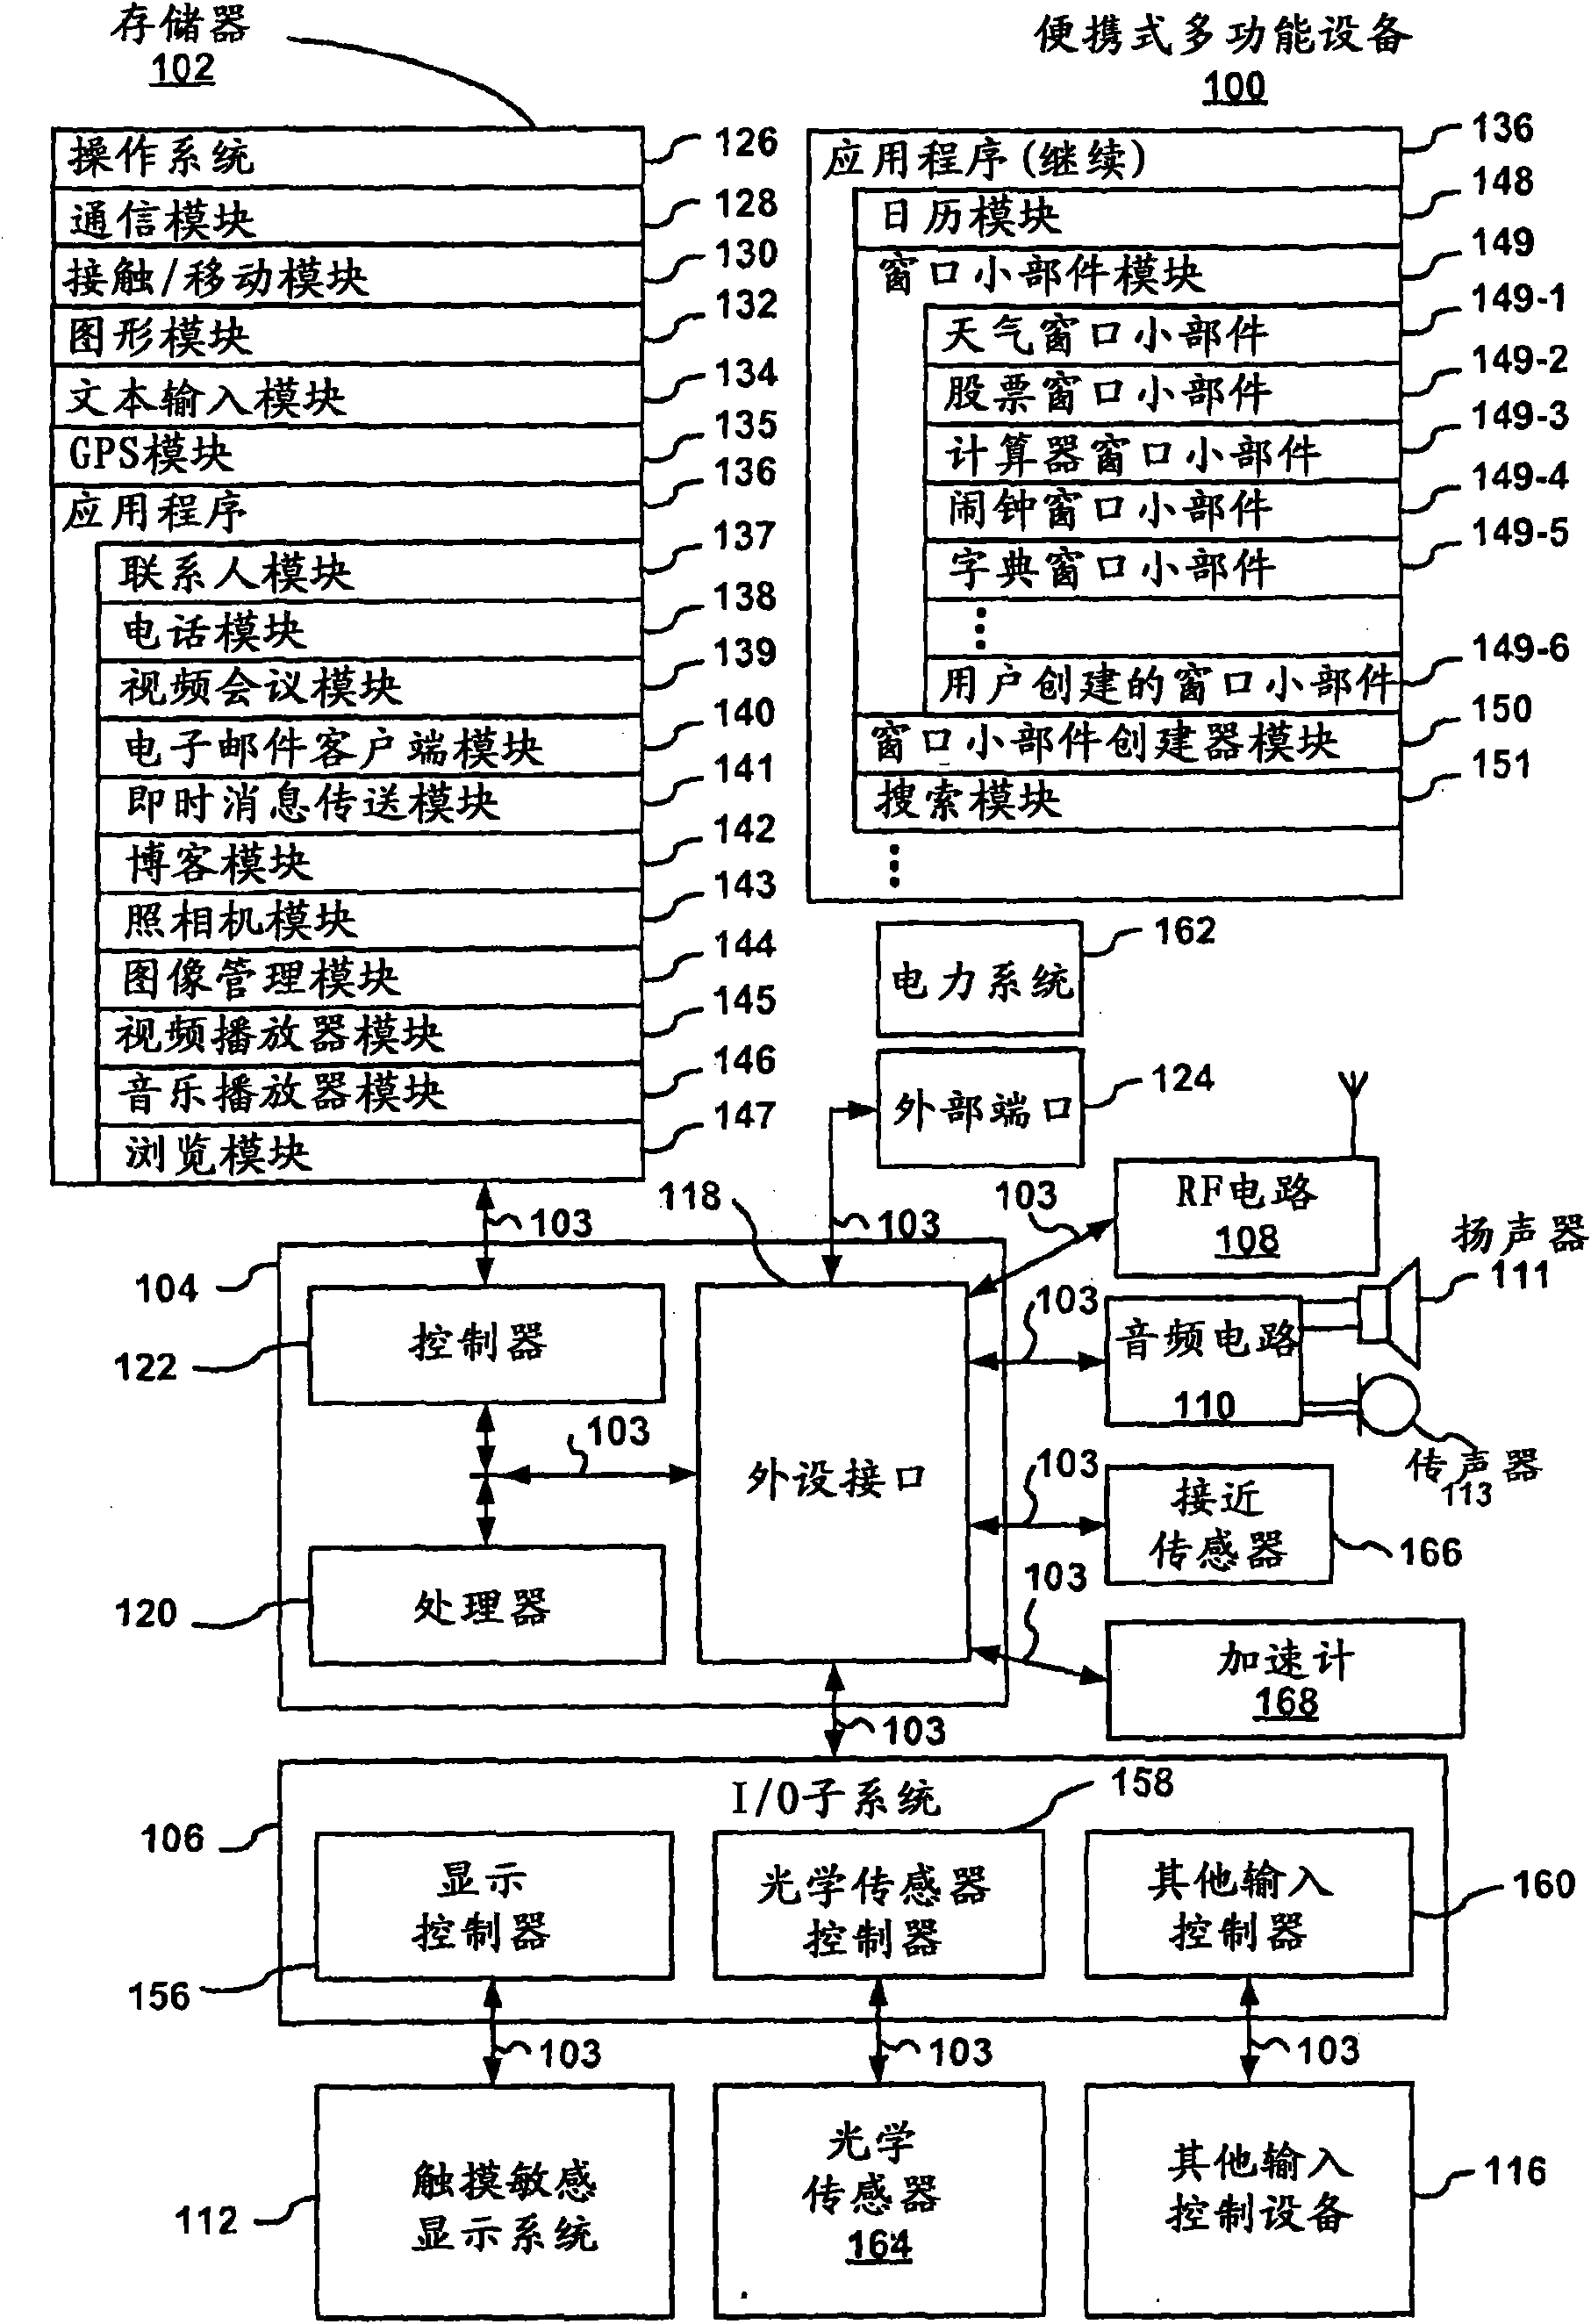 Portable multifunction device,method, and graphical user interface for translating displayed content